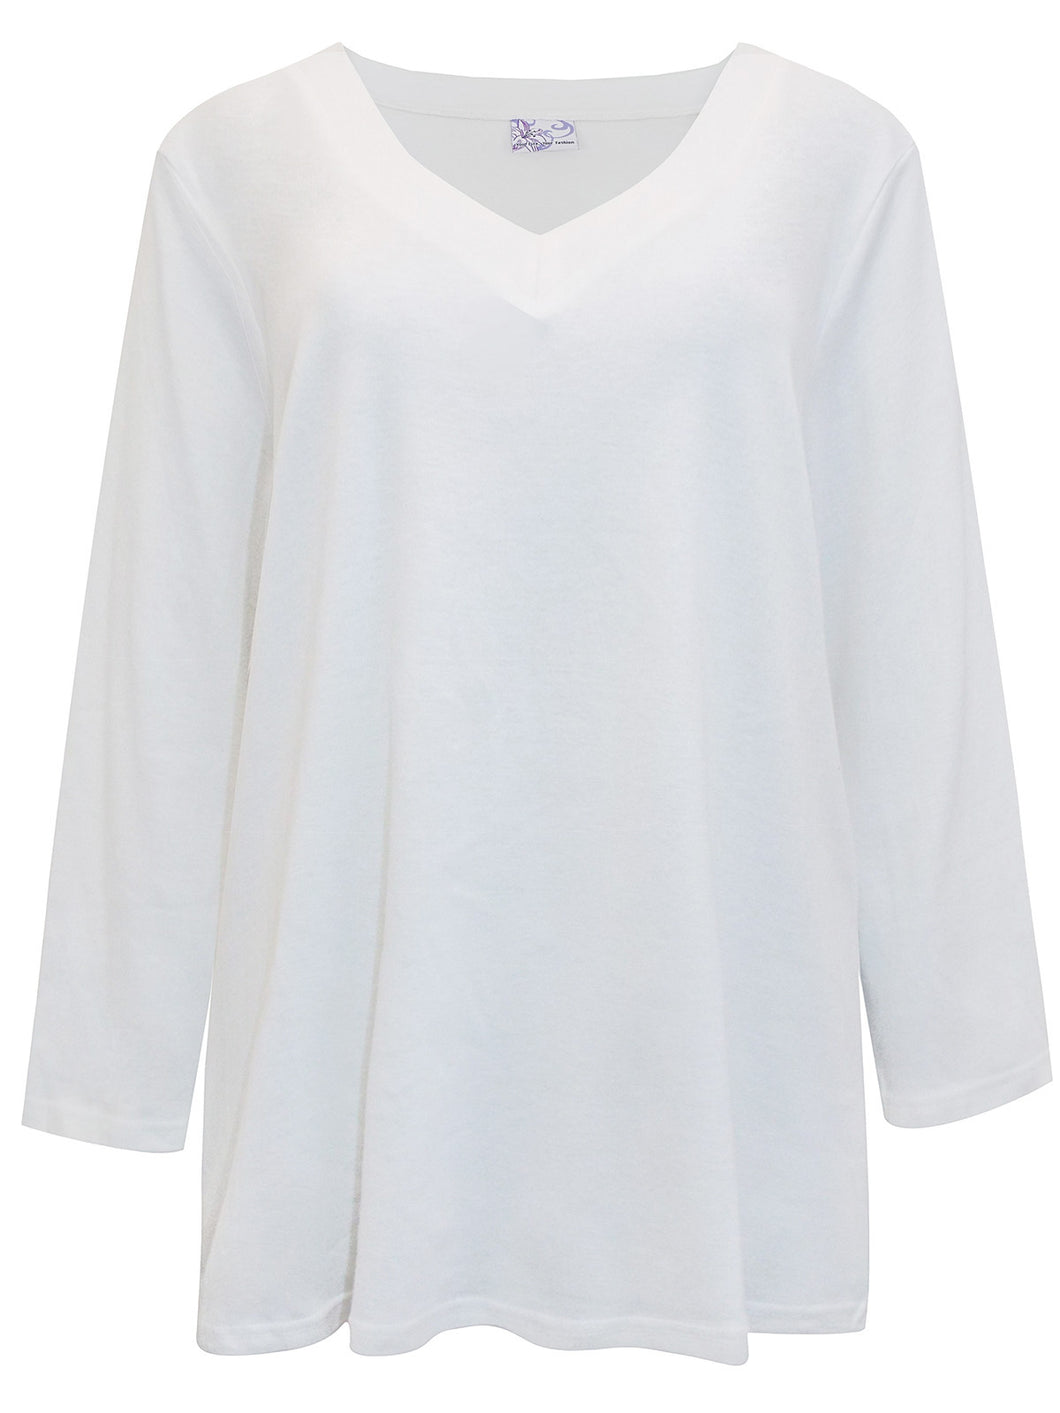 Ladies White Pure Cotton V-Neck Long Sleeve Plus Size Tunic Tops